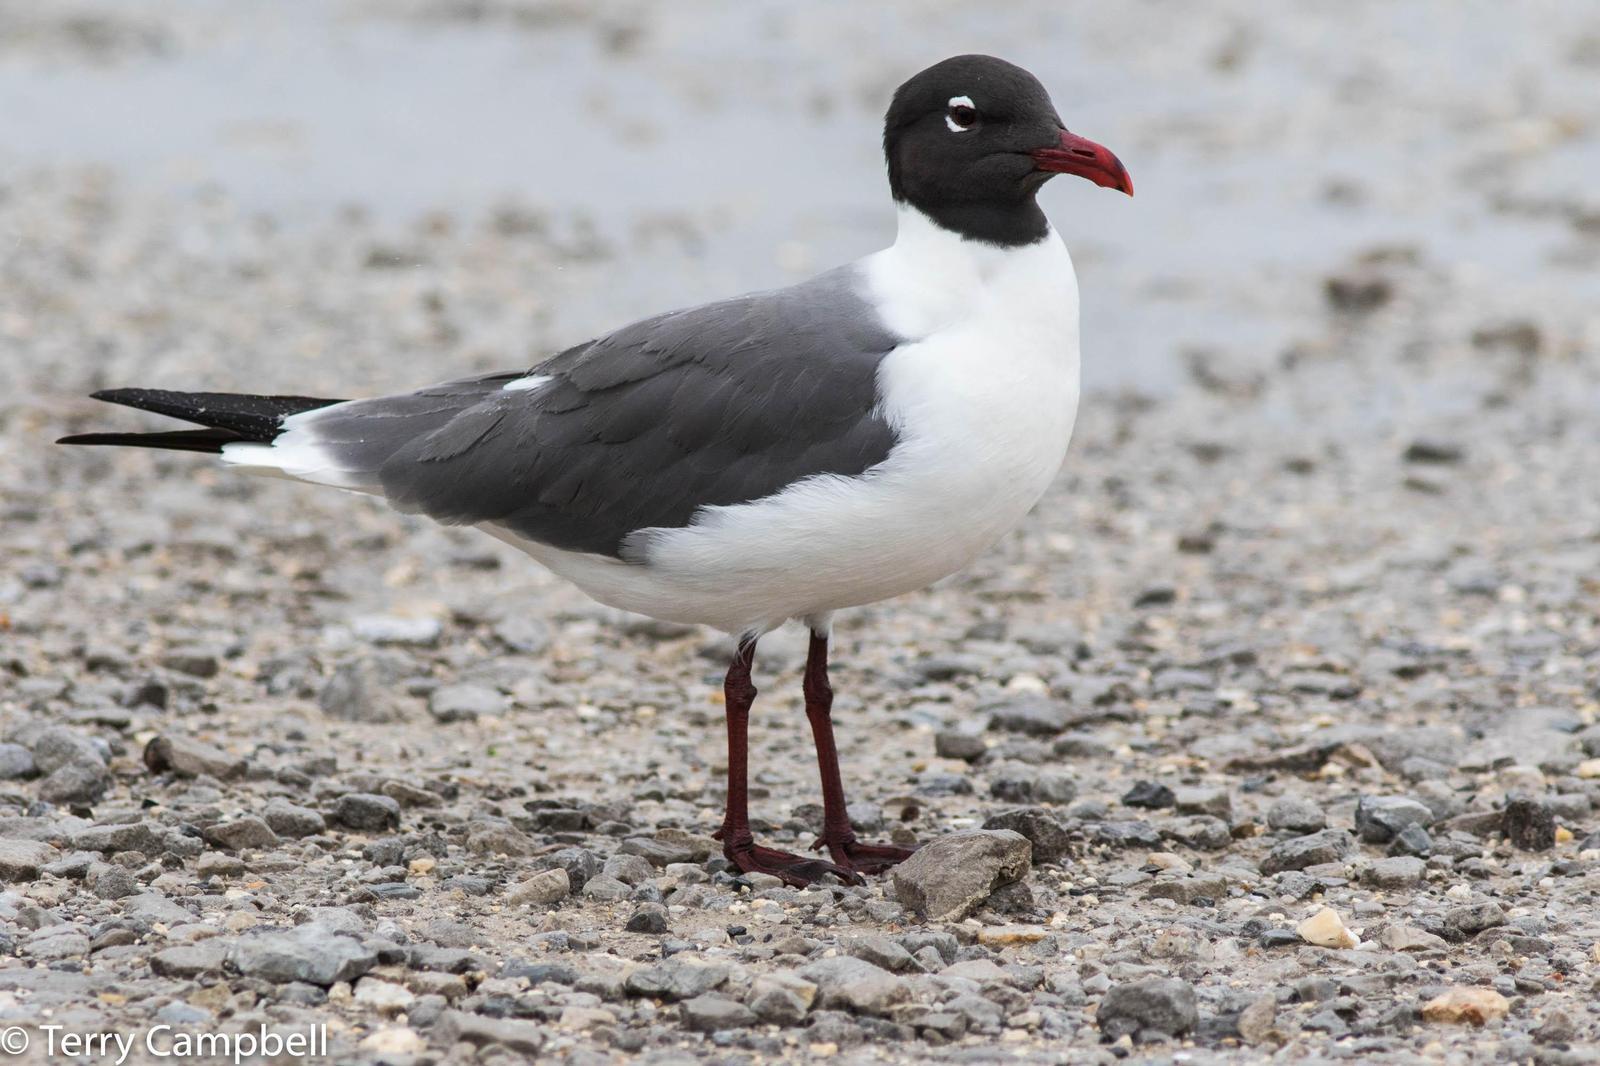 Laughing Gull Photo by Terry Campbell